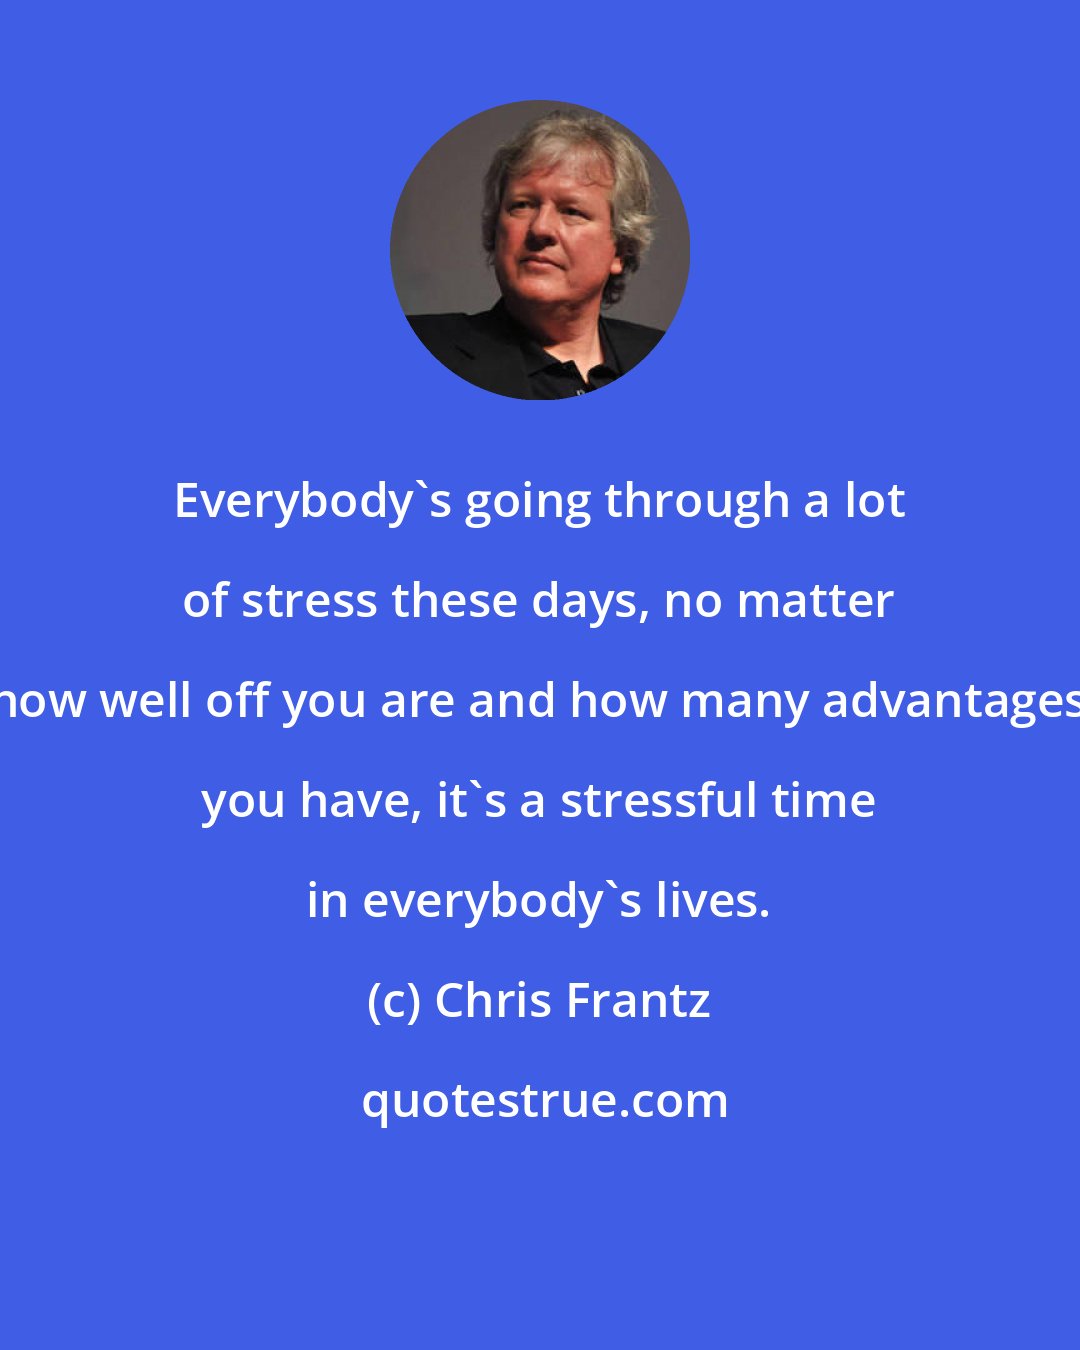 Chris Frantz: Everybody's going through a lot of stress these days, no matter how well off you are and how many advantages you have, it's a stressful time in everybody's lives.